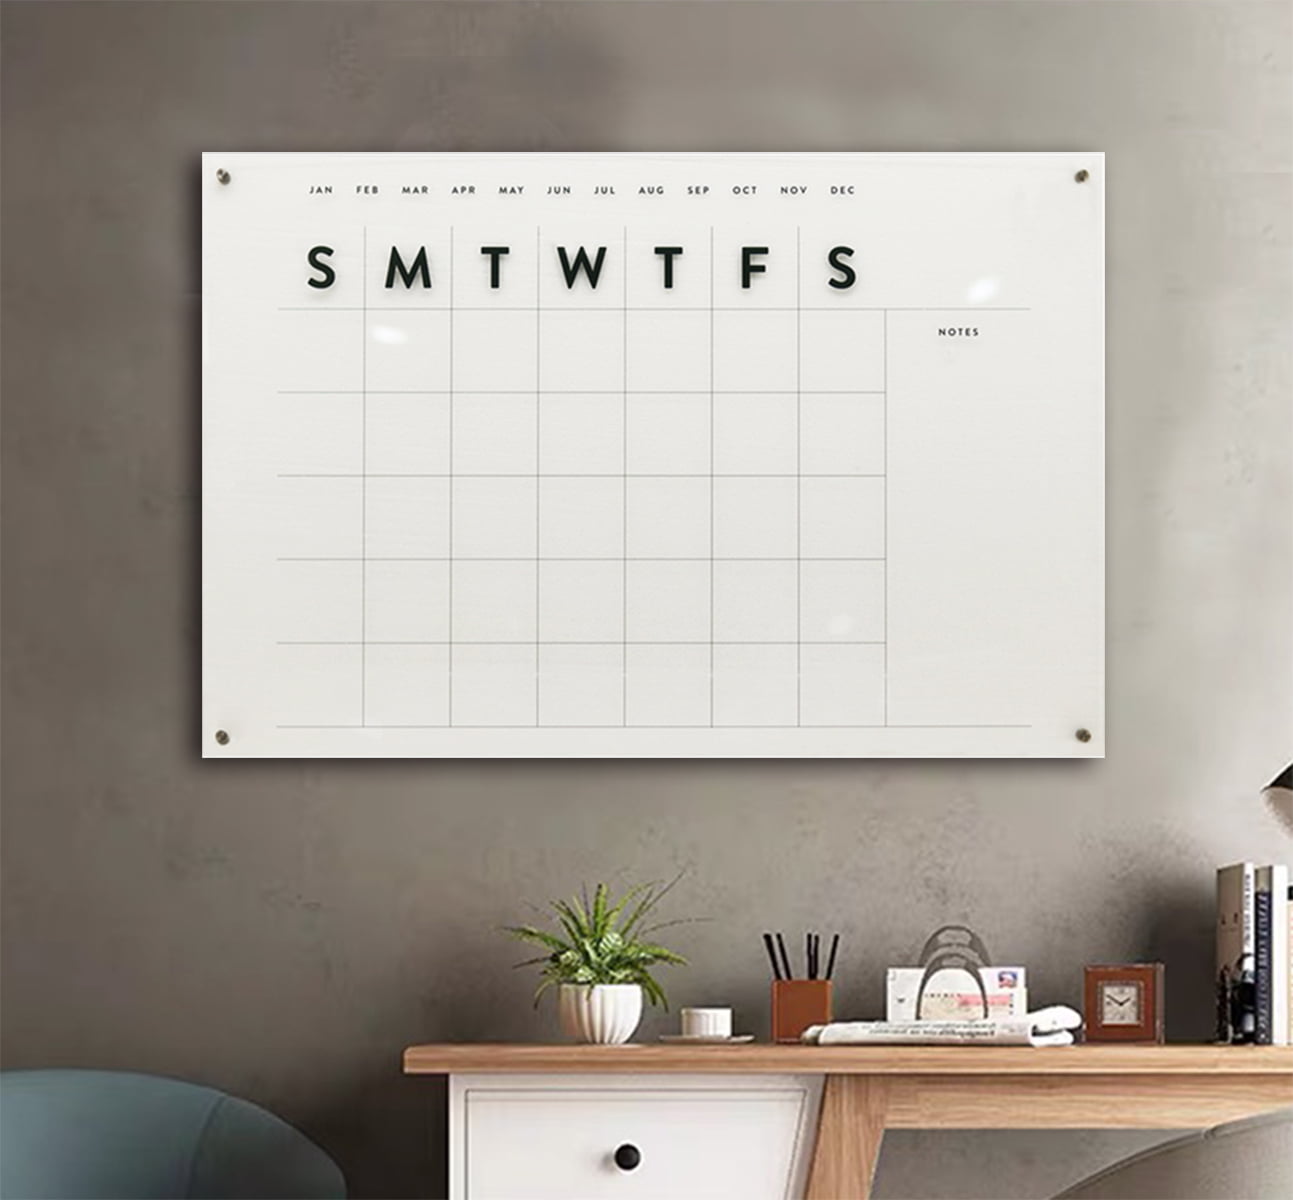 family command center dry erase board clear acrylic calendar office decor 03-009-065 Acrylic Daily Schedule Board For Wall